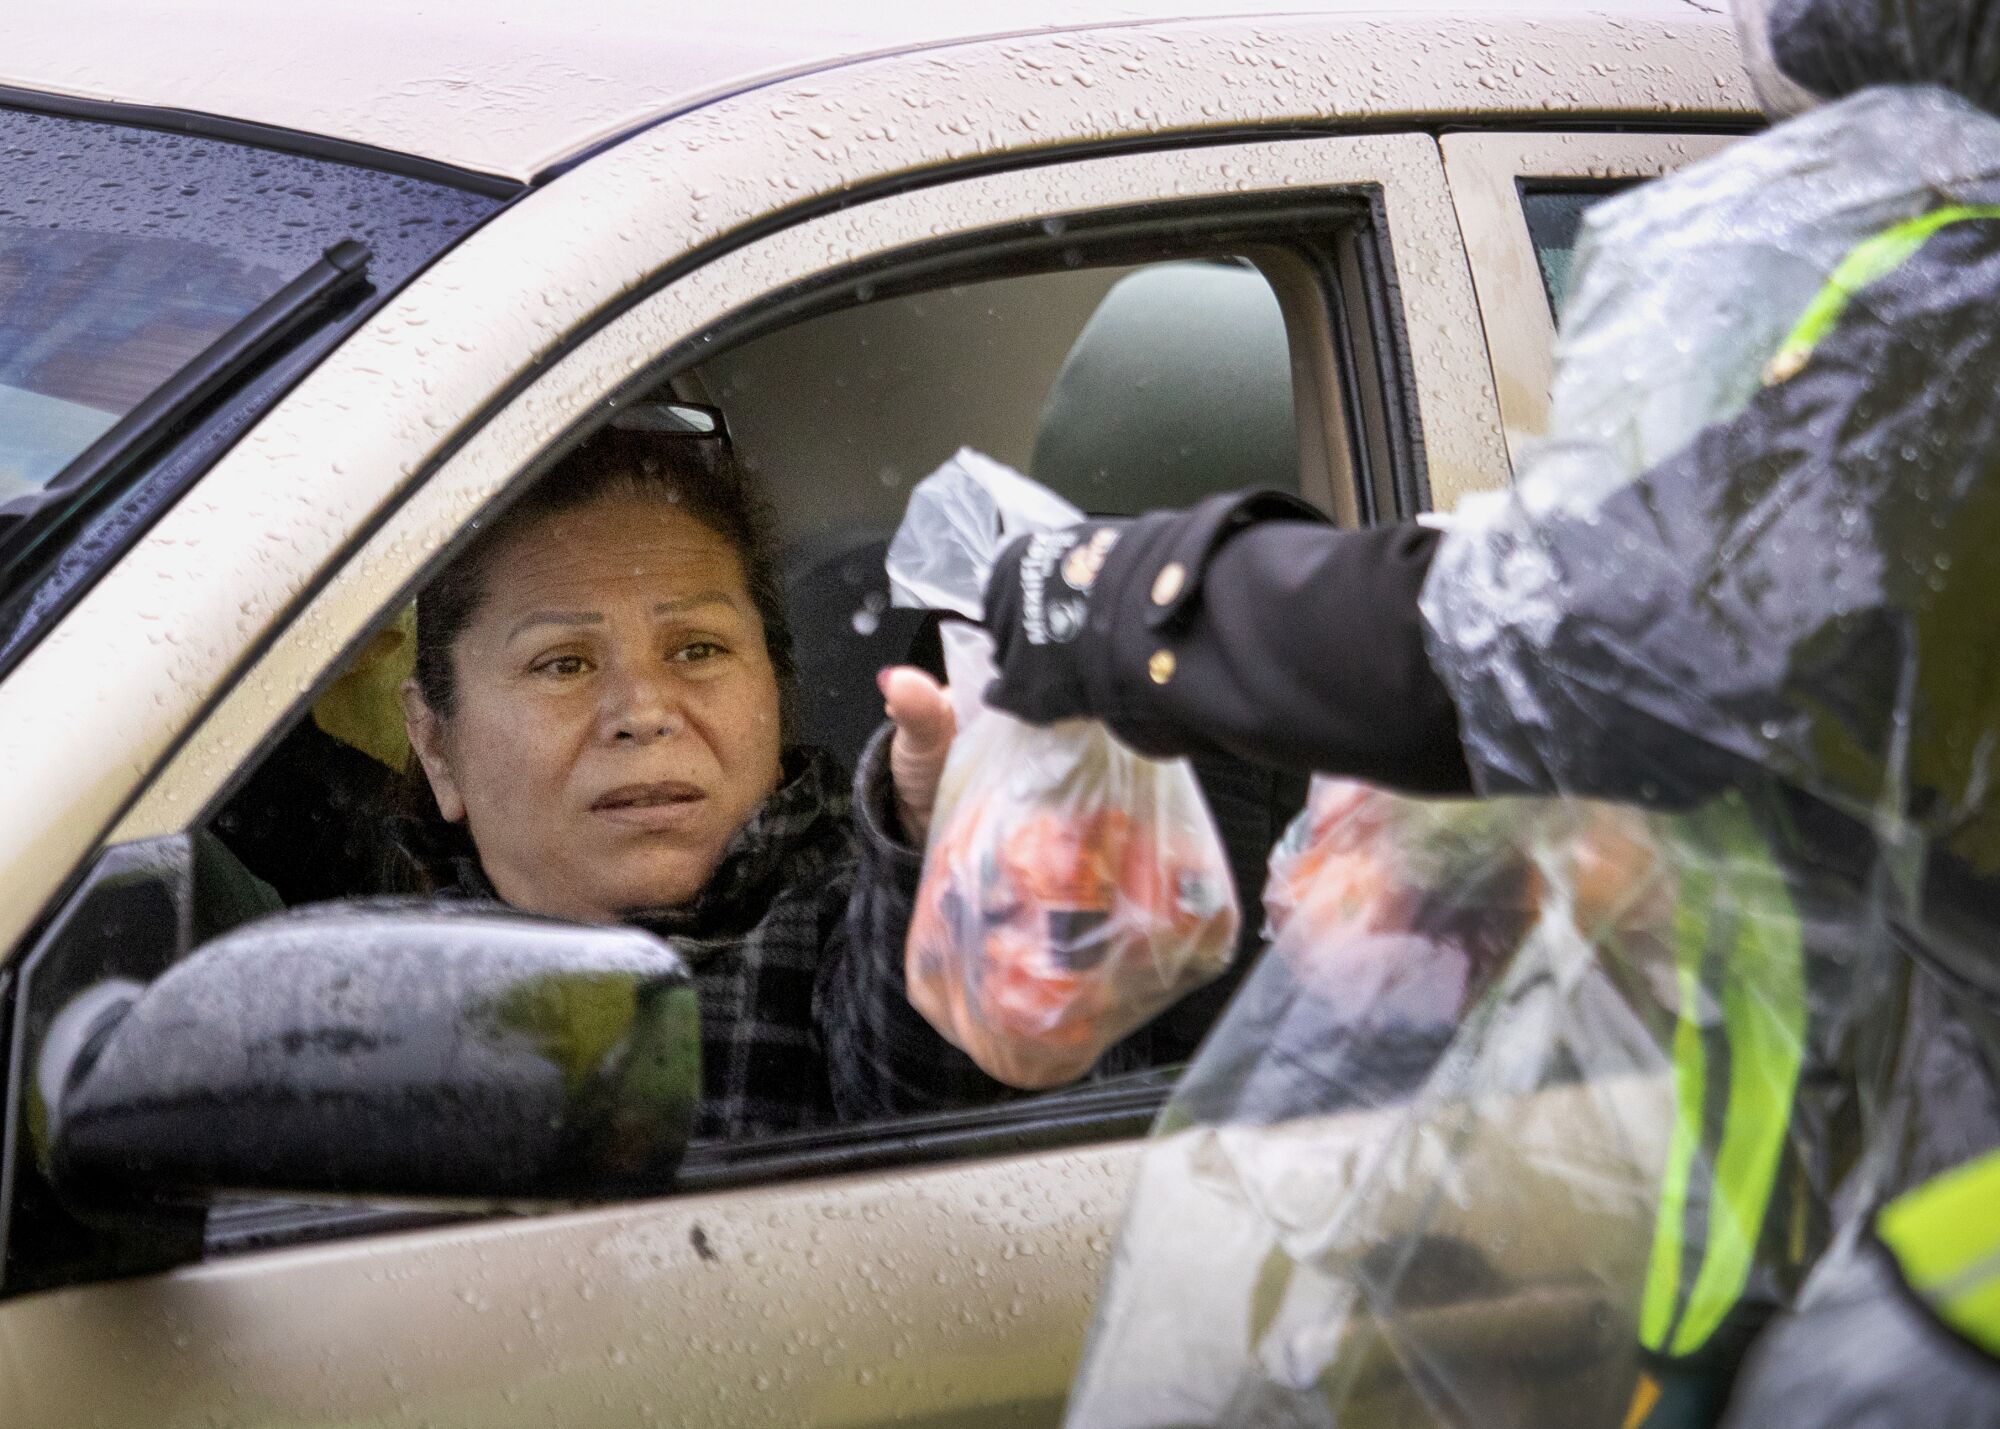 A woman reaches out of a driver's seat to grab a small plastic bag with foot items from a person standing outside.